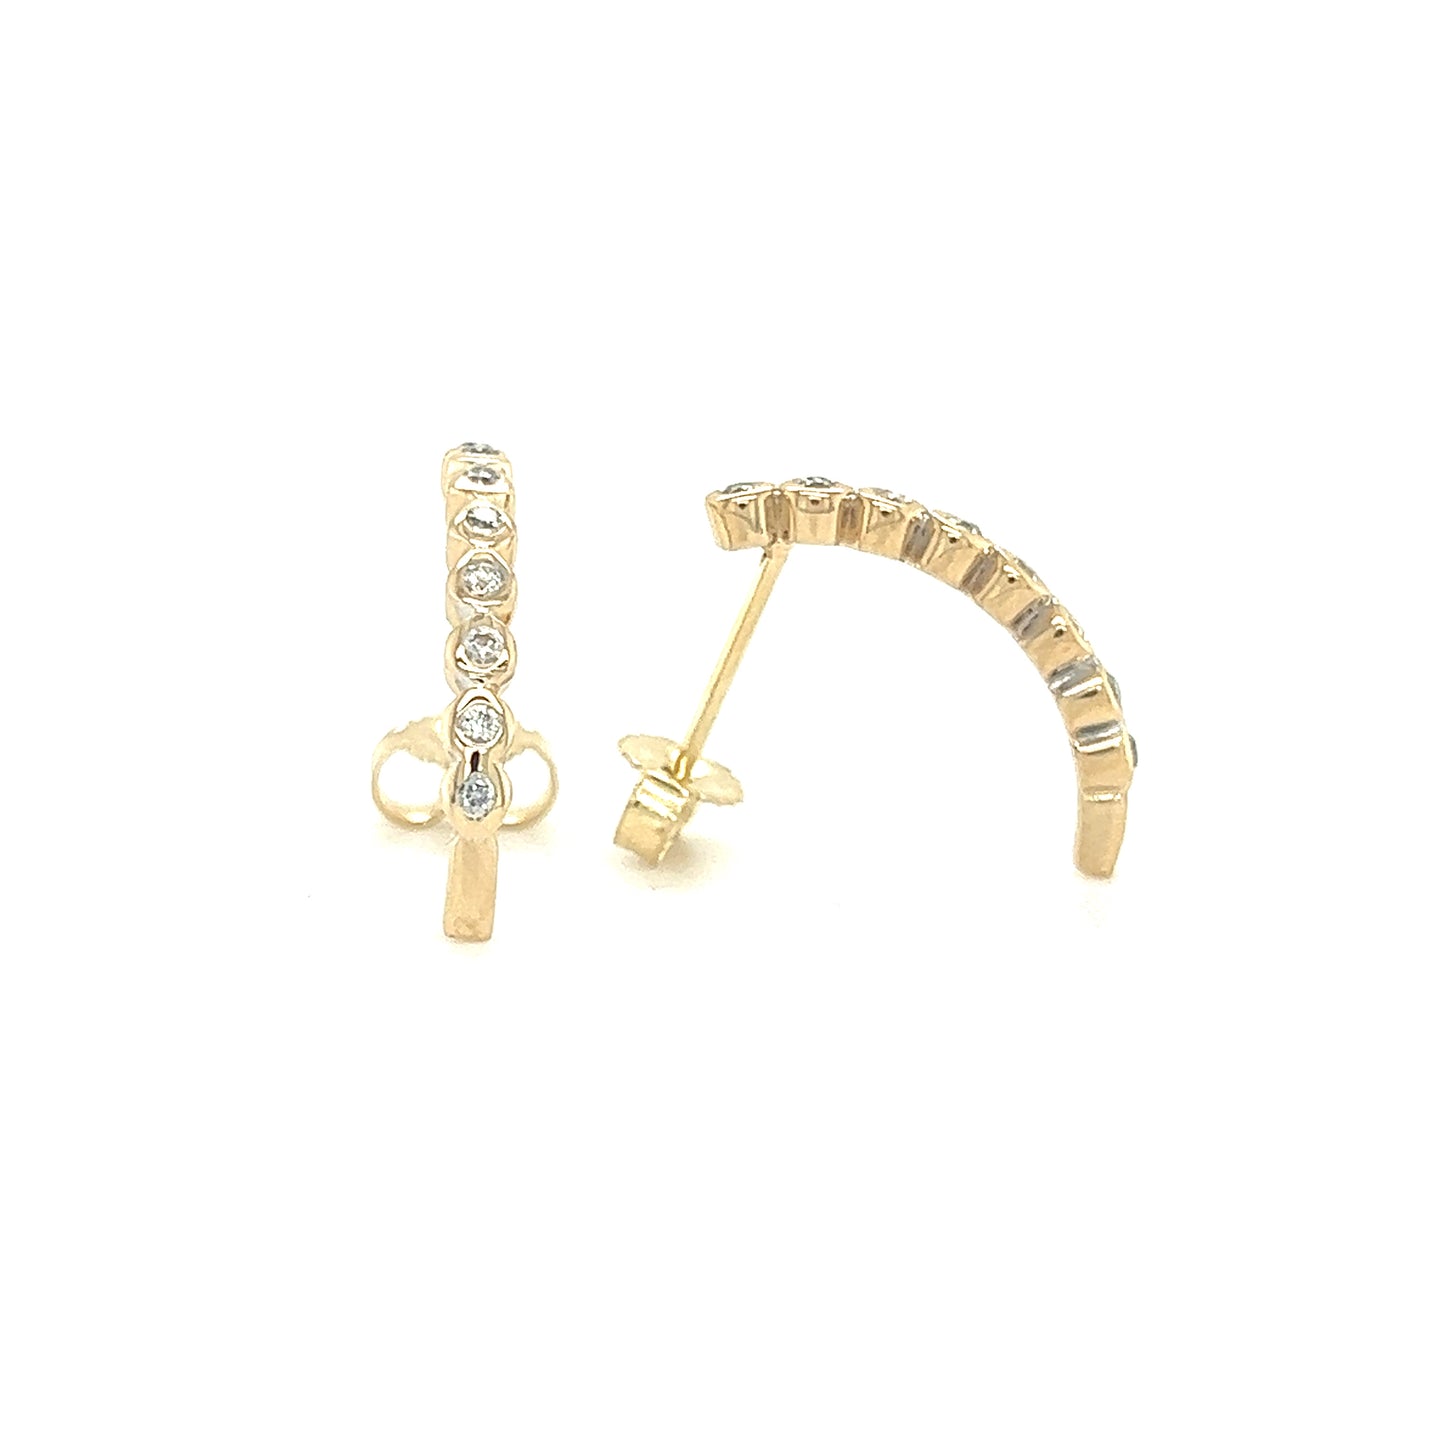 J-Hoop Earrings with Sixteen Diamonds in 14K Yellow Gold Front and Side View